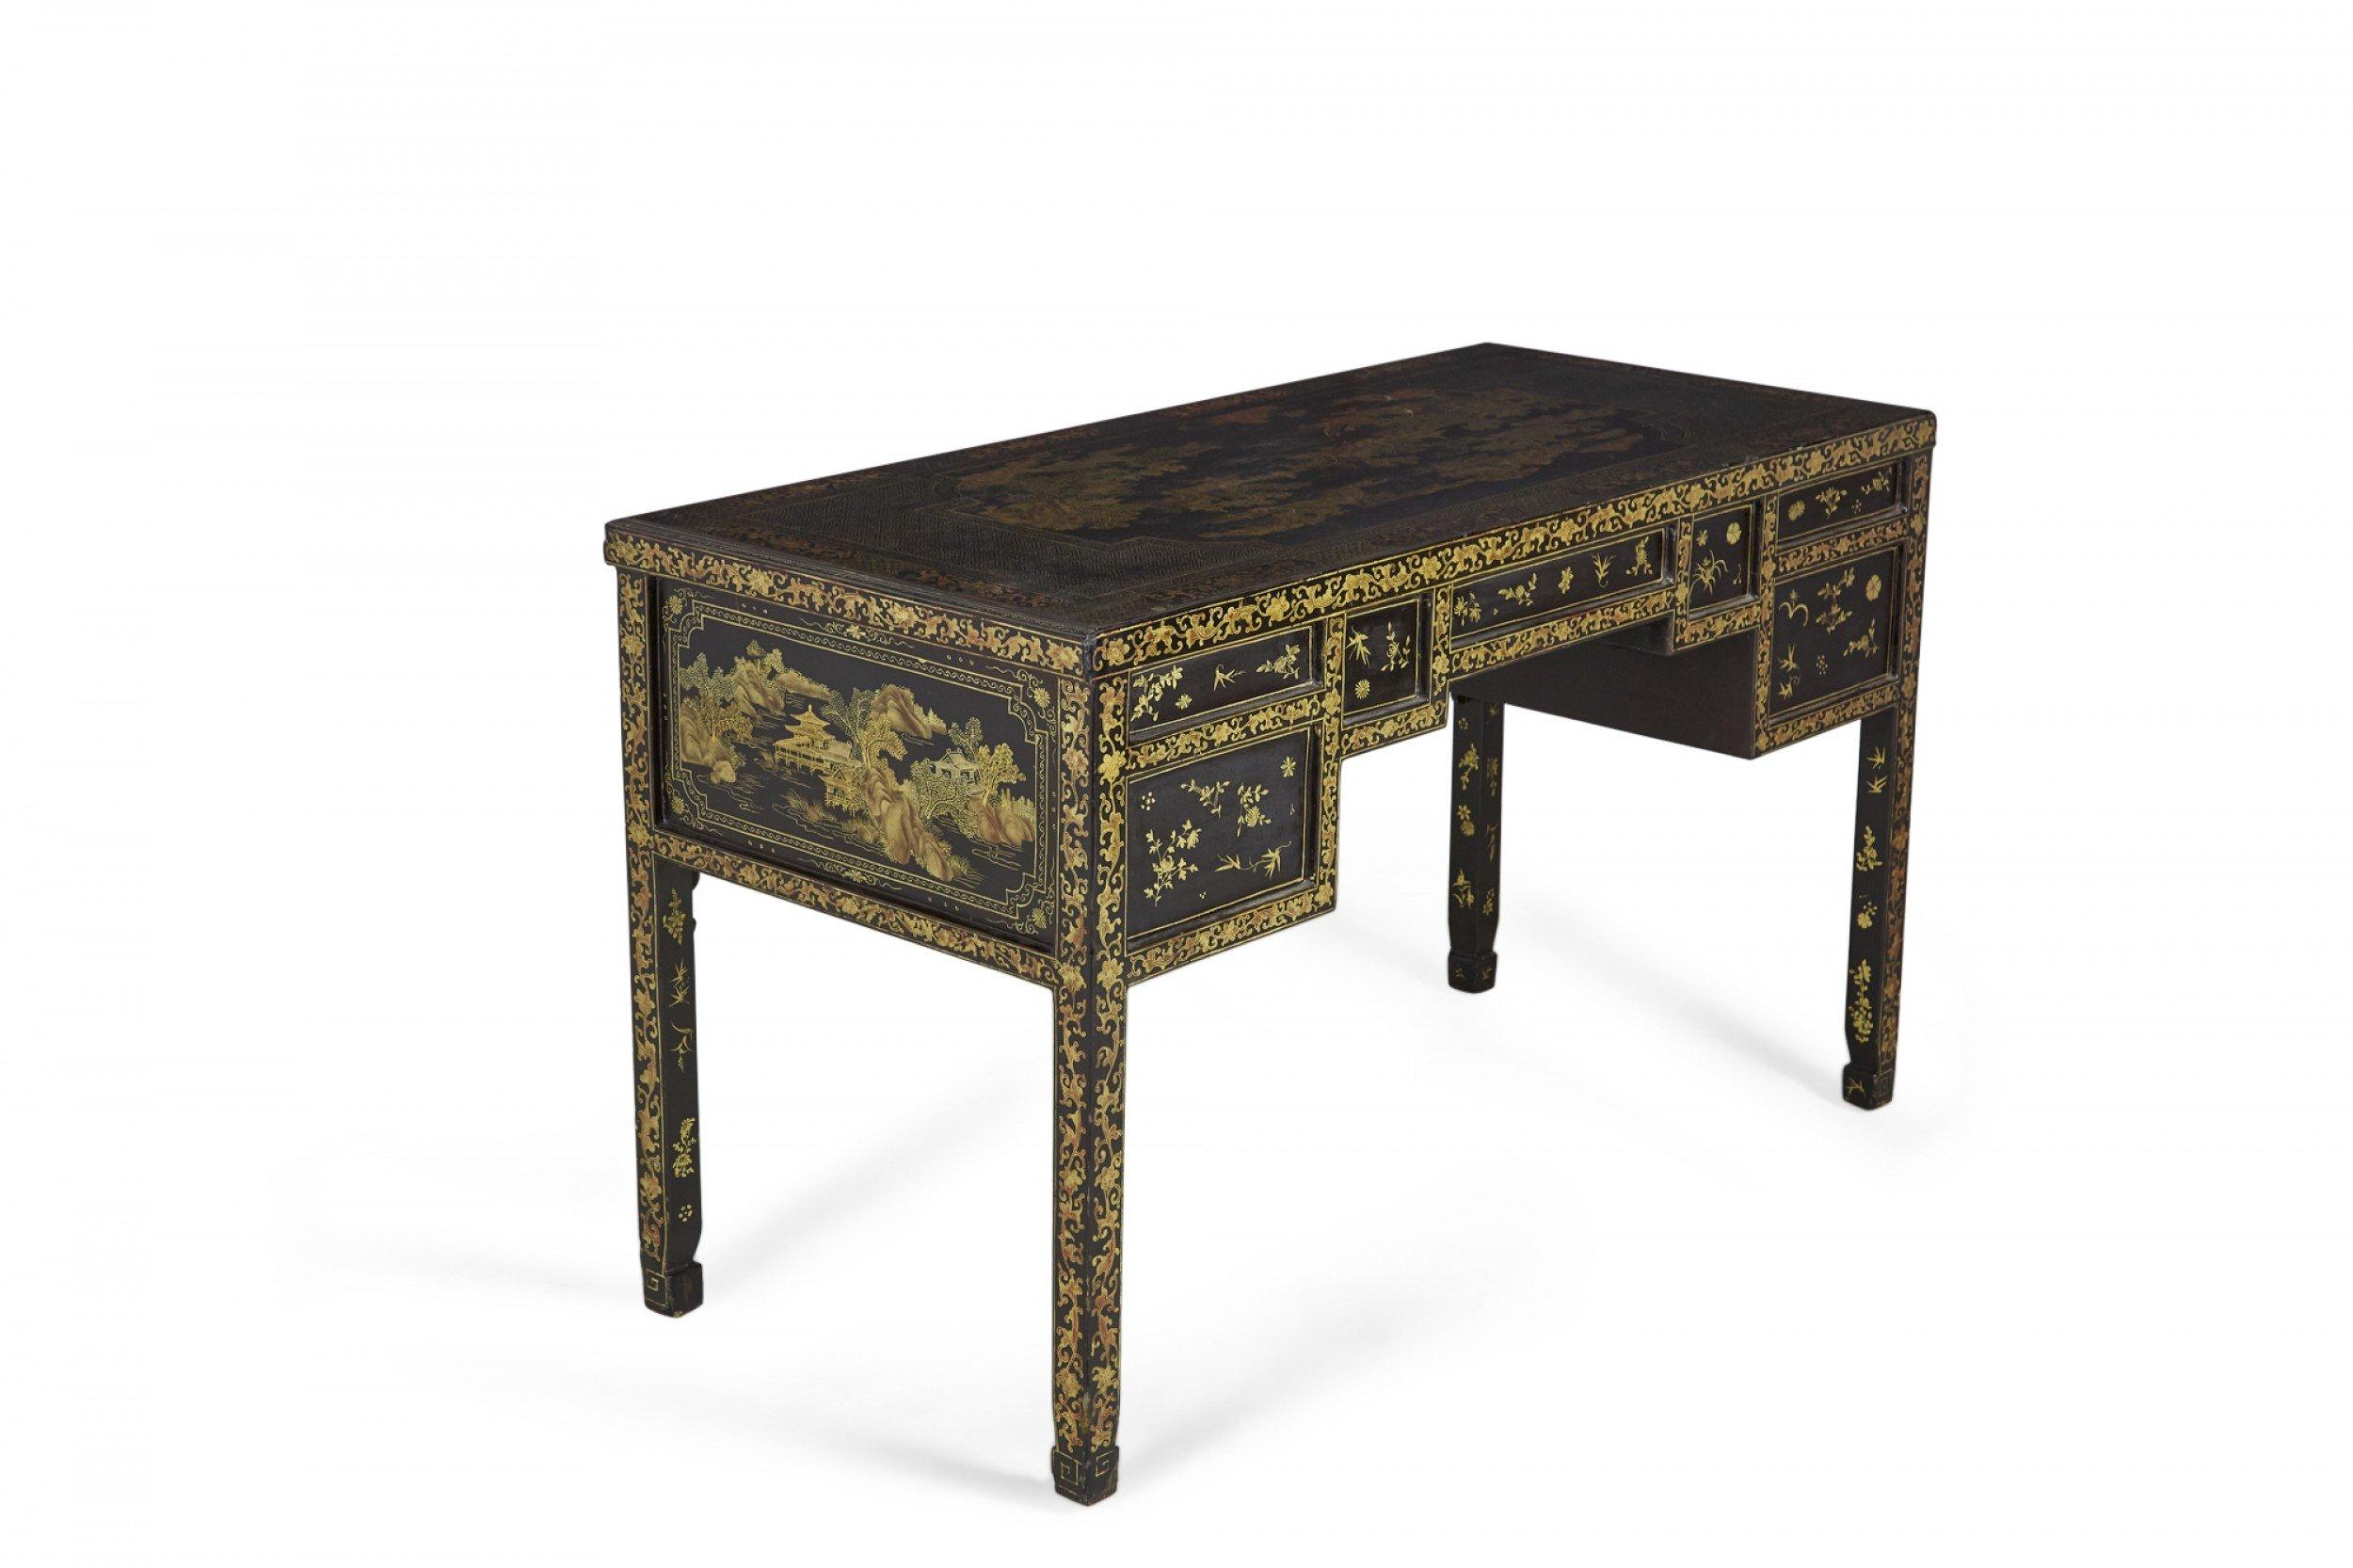 Metal 19th Century English Regency Chinese Export Gilt Black Lacquer Desk For Sale